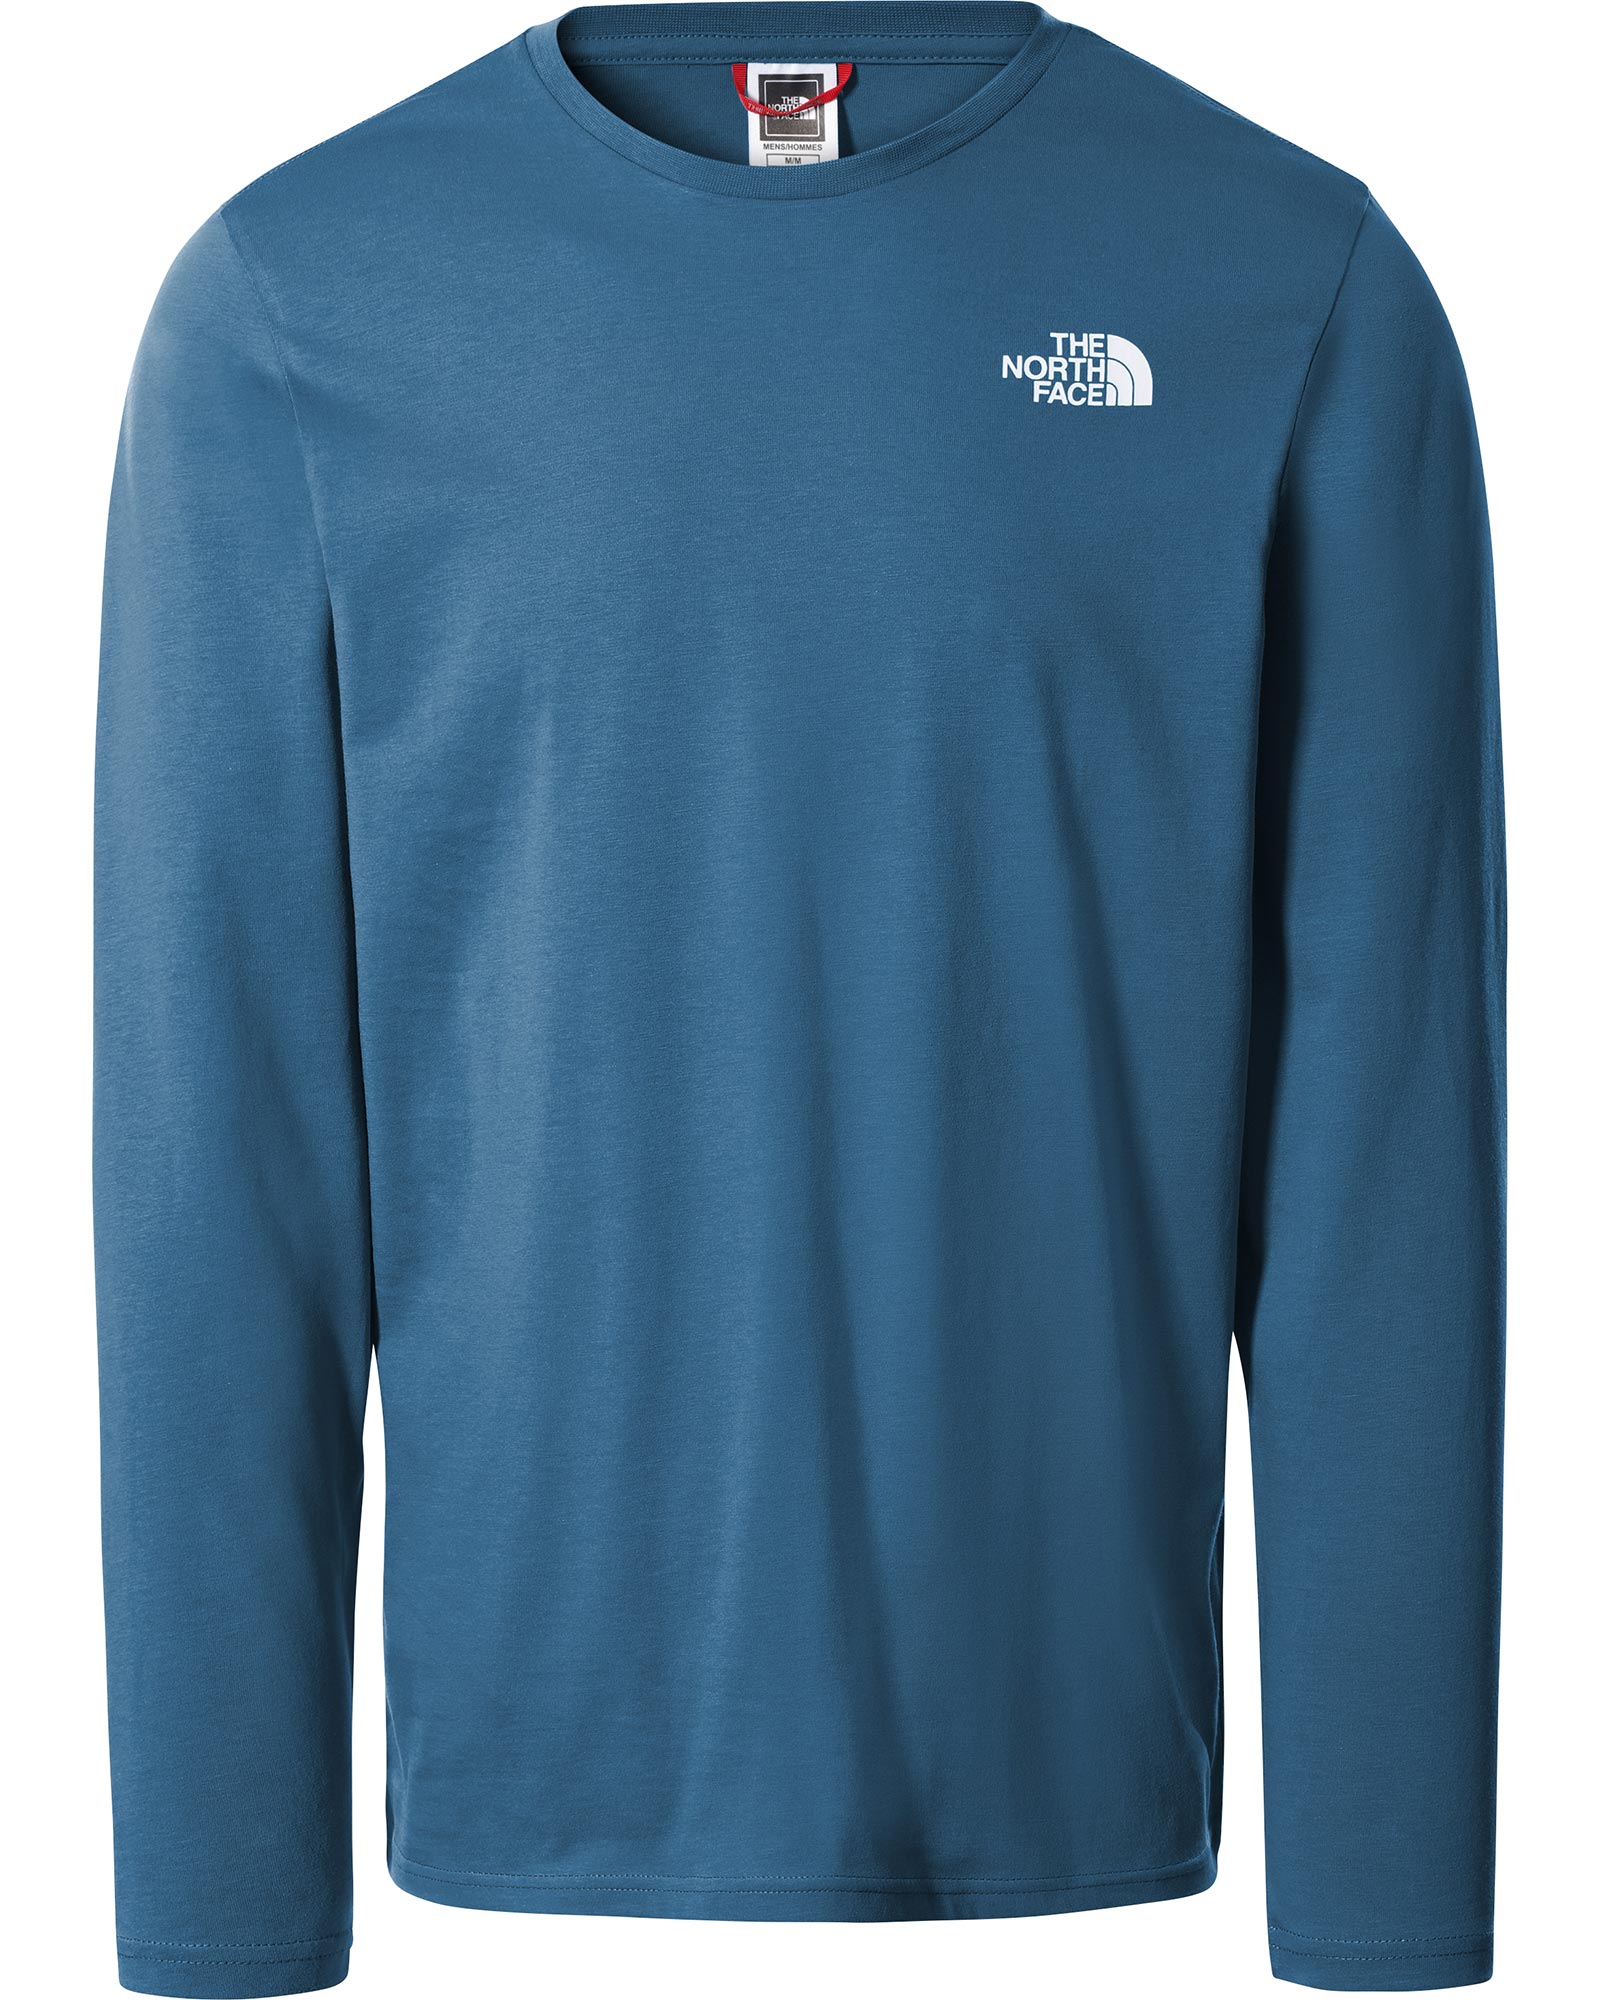 The North Face Easy Men’s Long Sleeve T Shirt - Banff Blue S